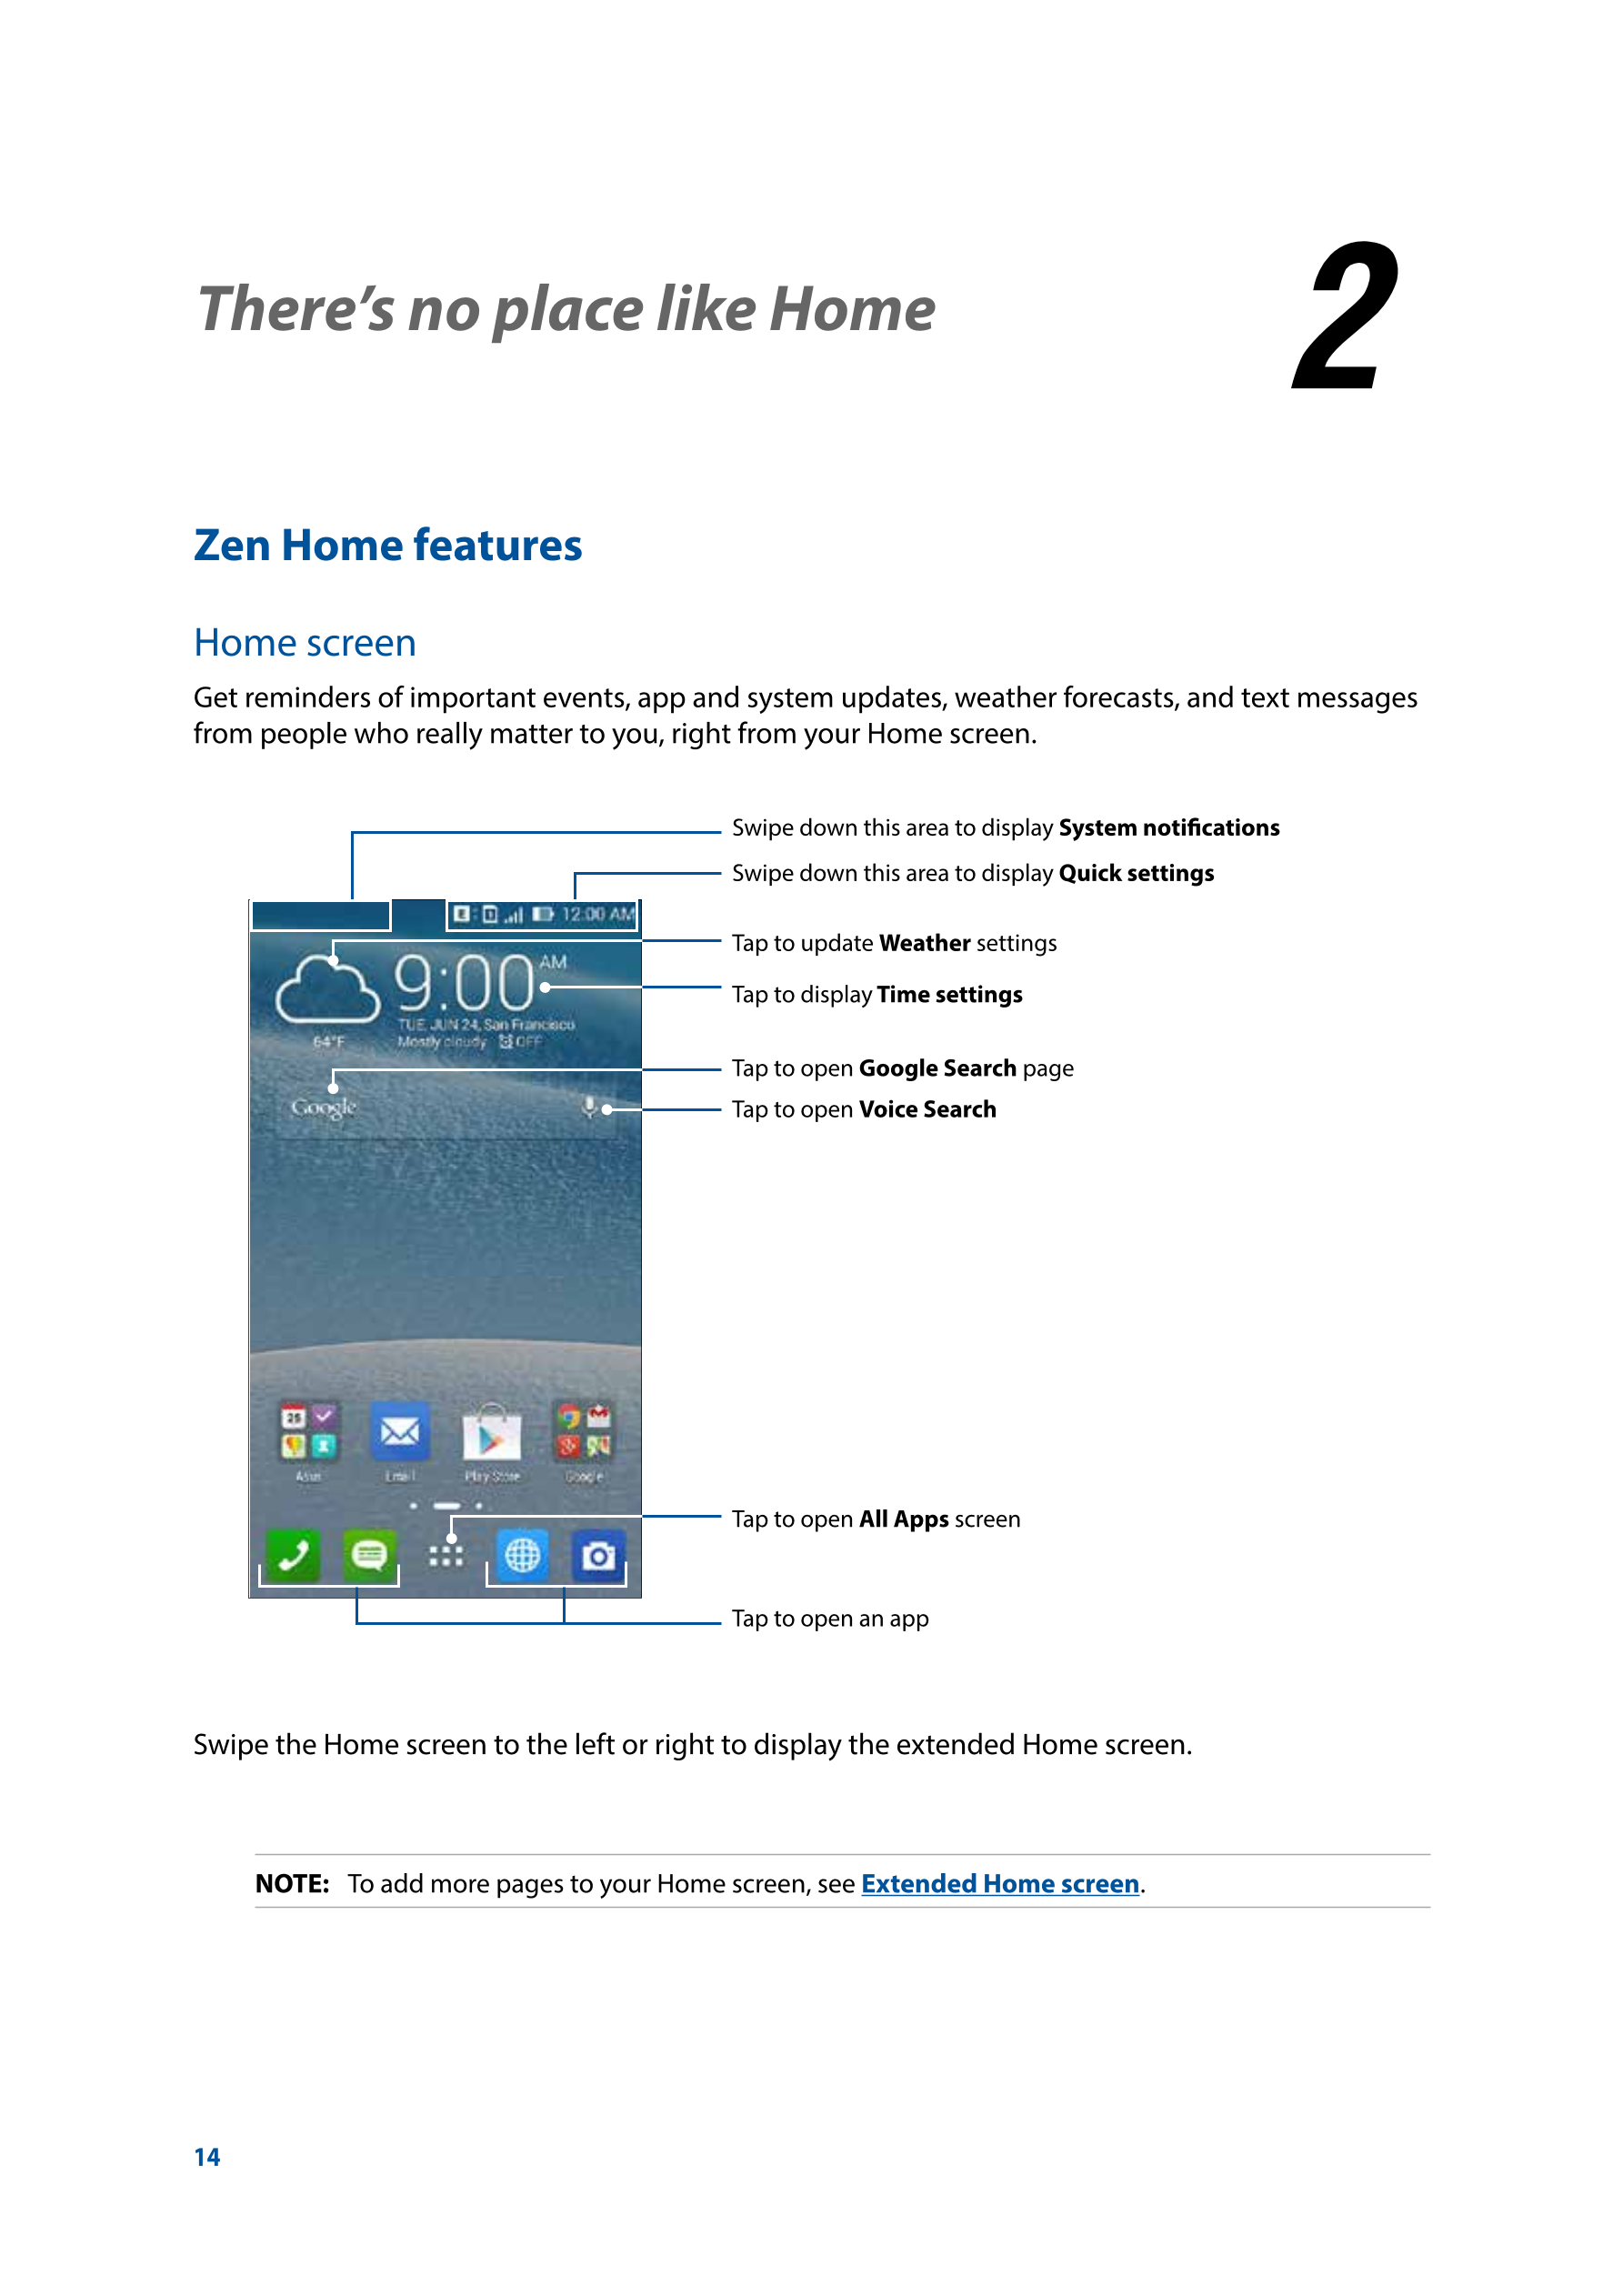 2  There’s no place like Home
There’s no place like Home 2
Zen Home features
Home screen
Get reminders of important events, app 